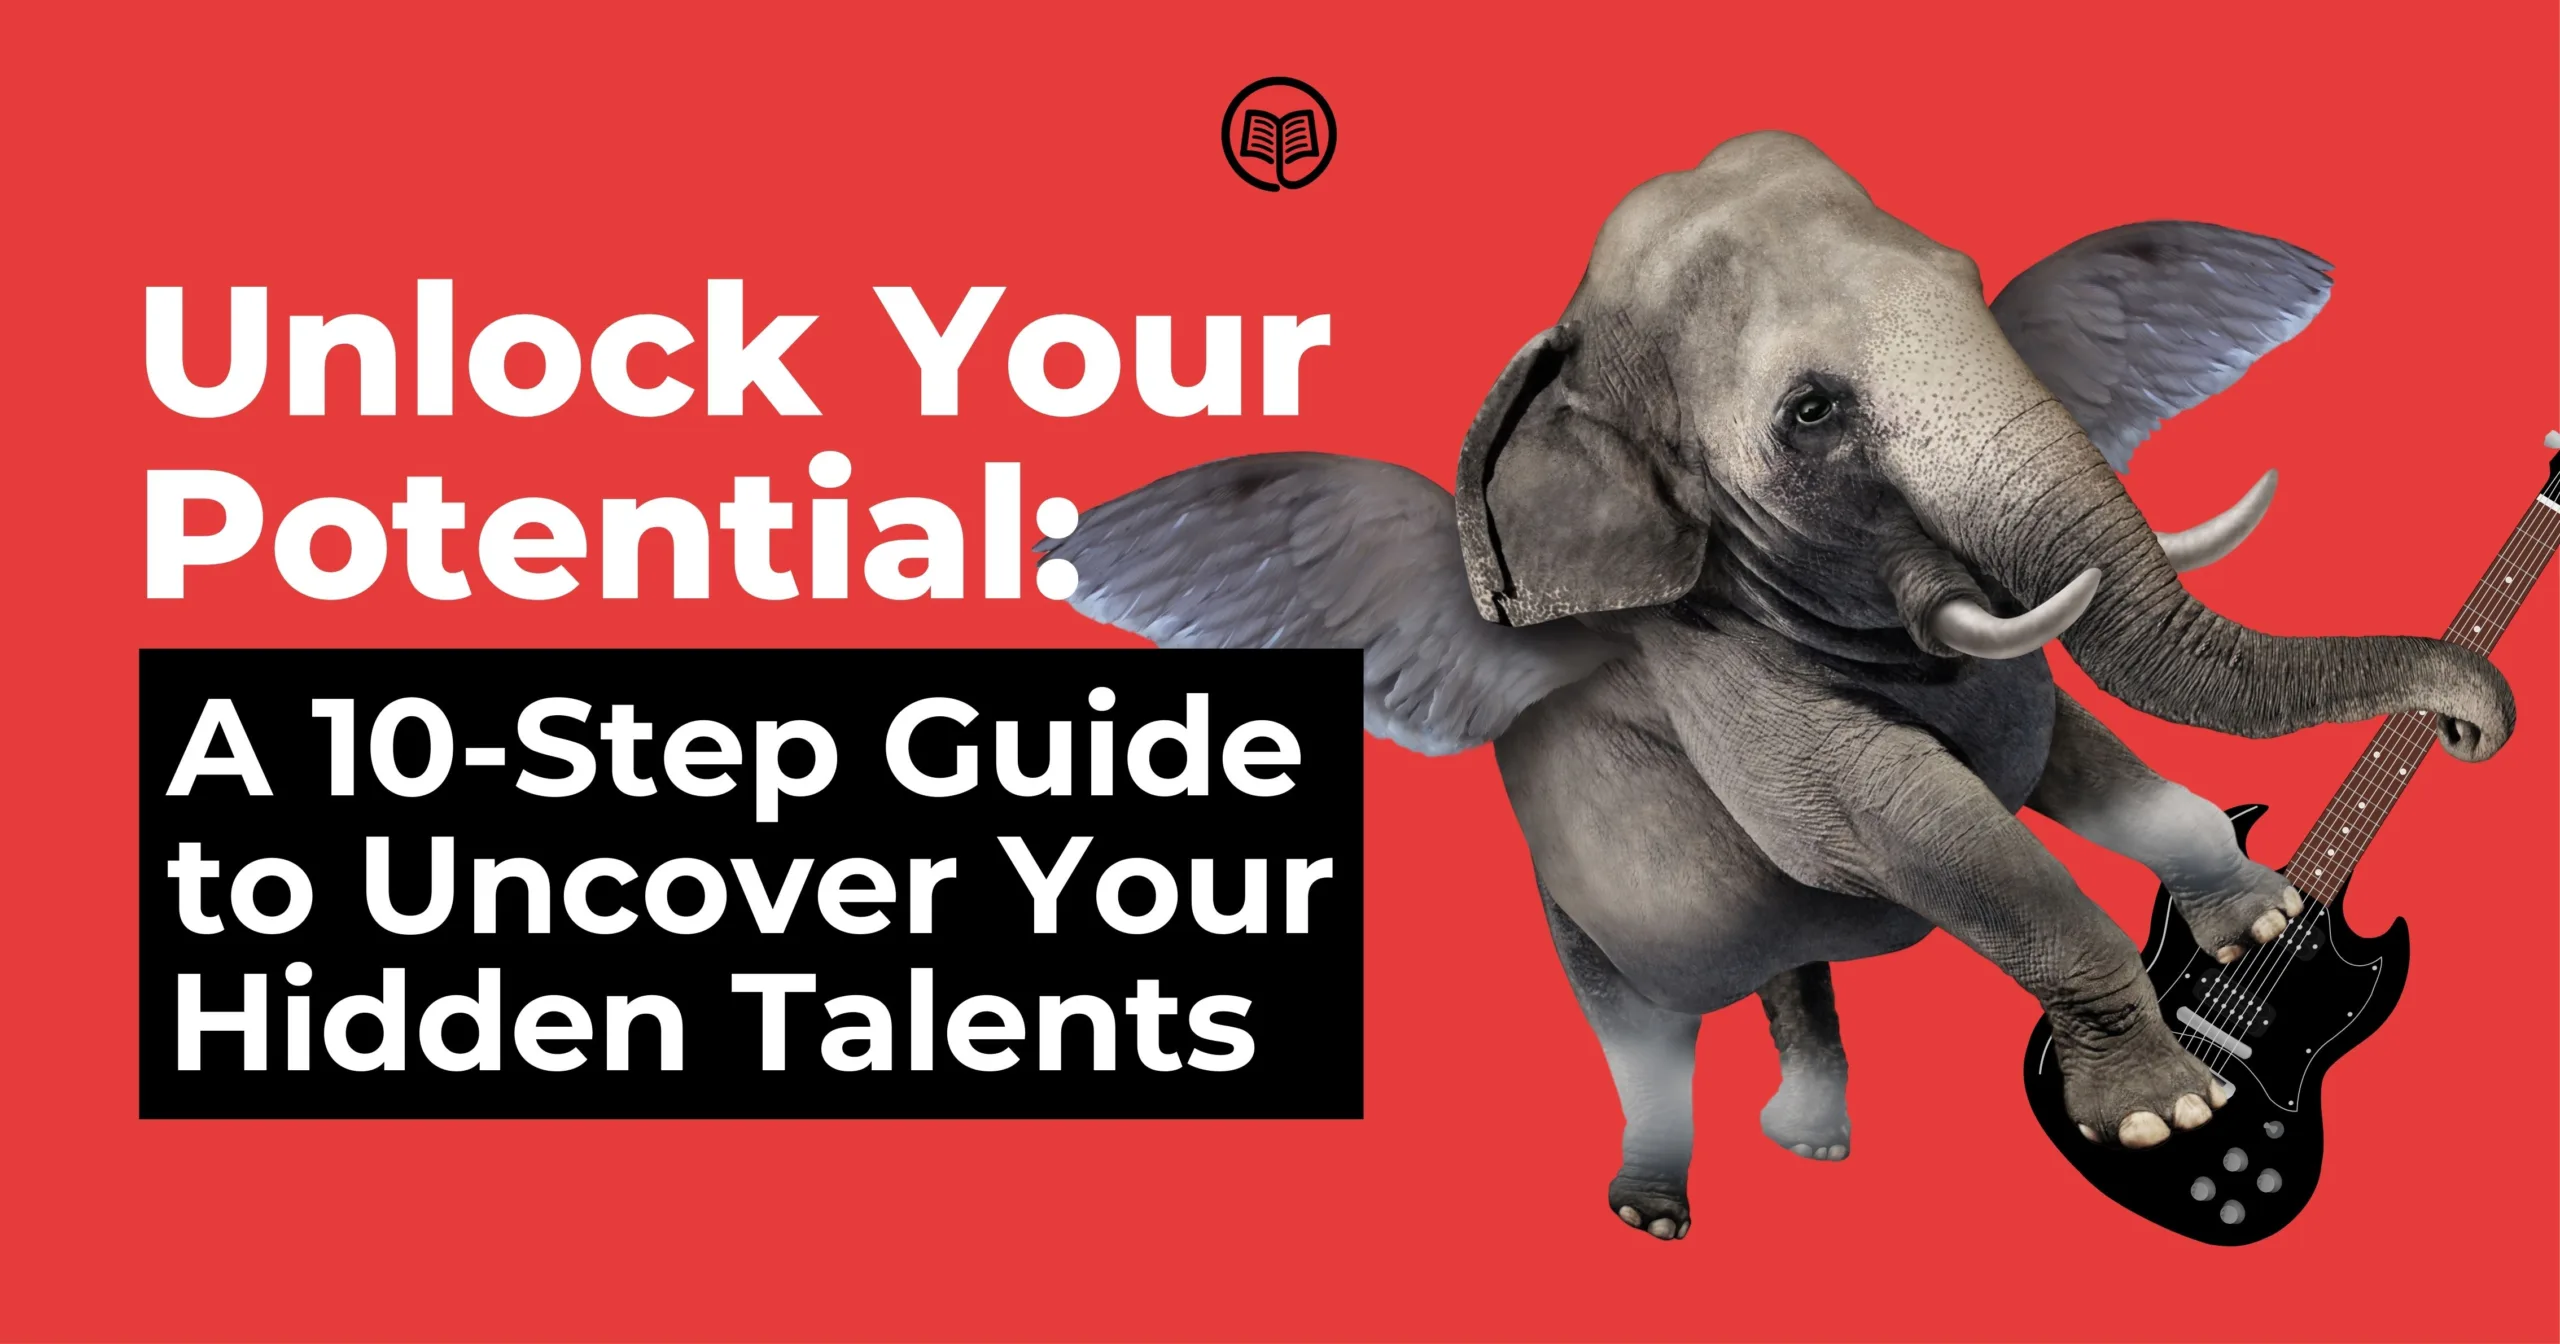 Unlock Your Potential: A 10-Step Guide to Uncovering Your Hidden Talents